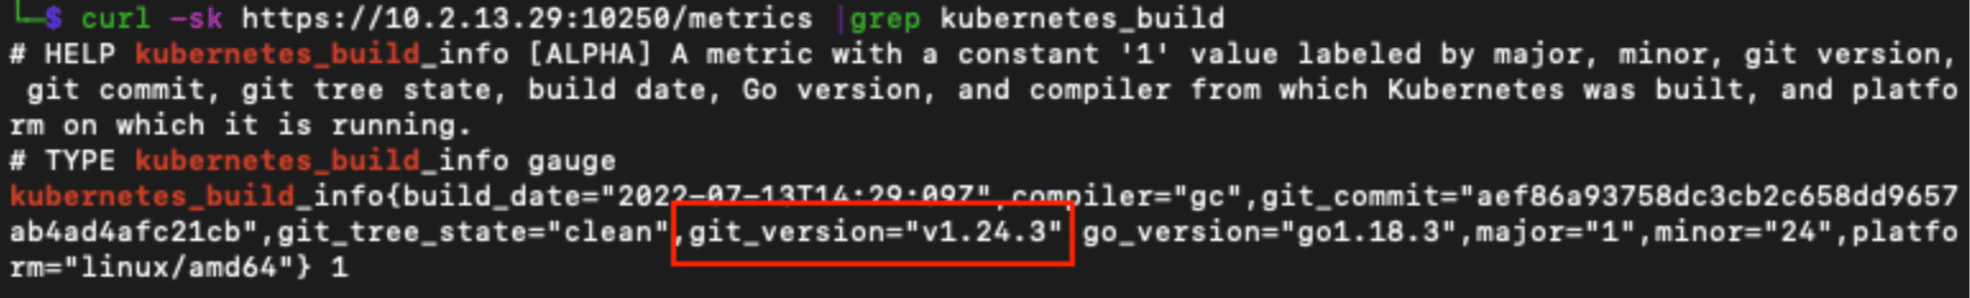 Narrowing down the output to the version information using ’grep’. 